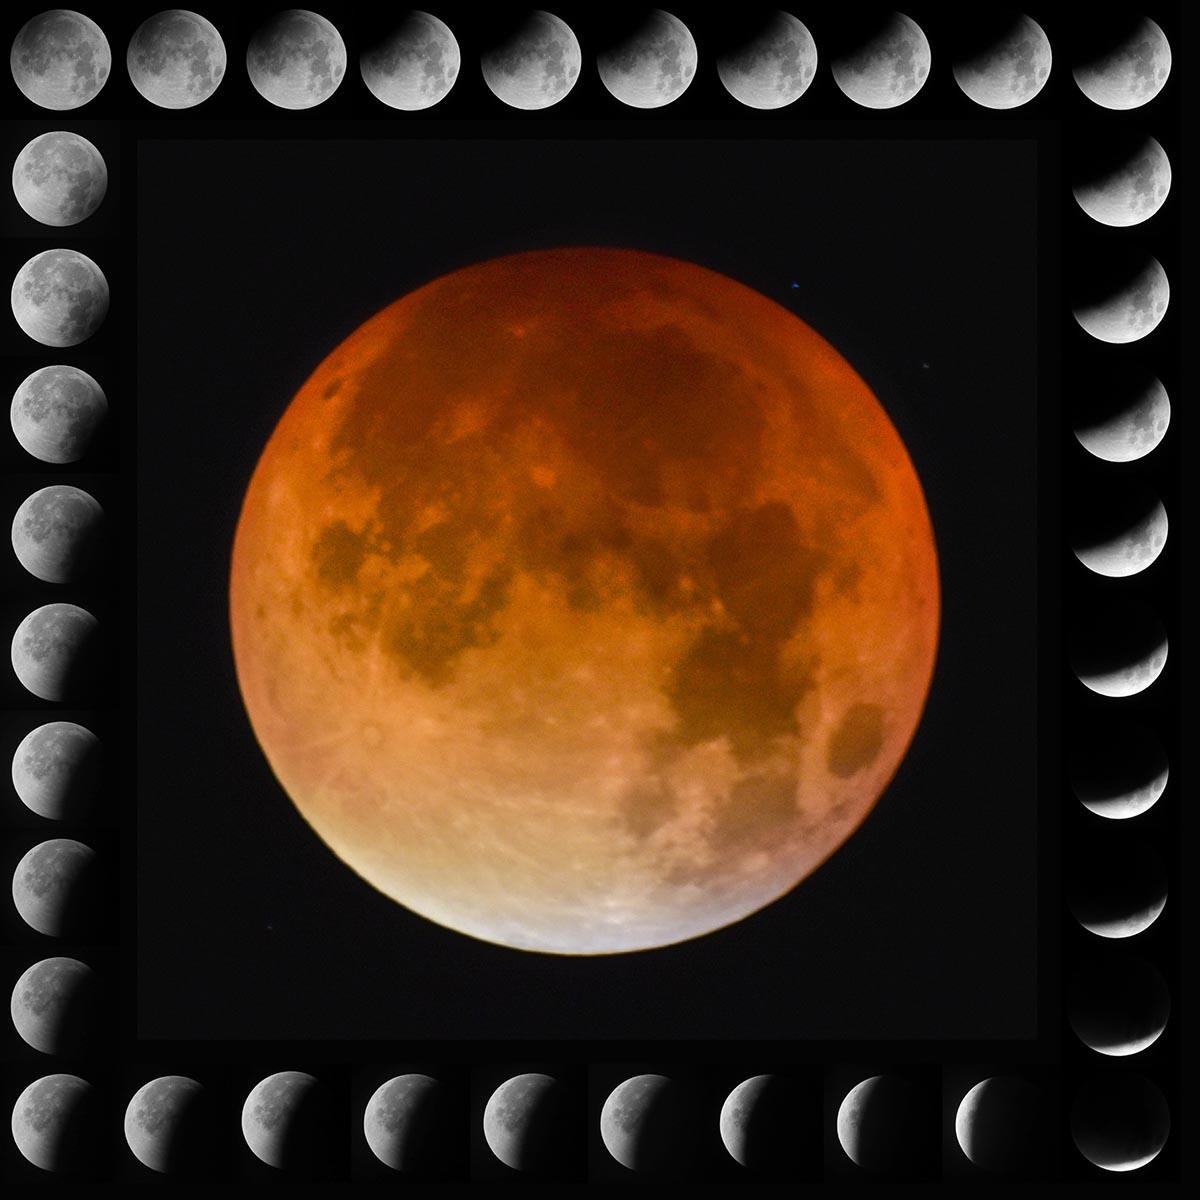 28/09/2015 
Location : Chilson Hill
Catchline : Super Moon Eclipse
Length: On spec
Photographer : Mark Hemsworth
Caption:

Super moon eclipse composite image of all phases

Copyright - Mark Hemsworth